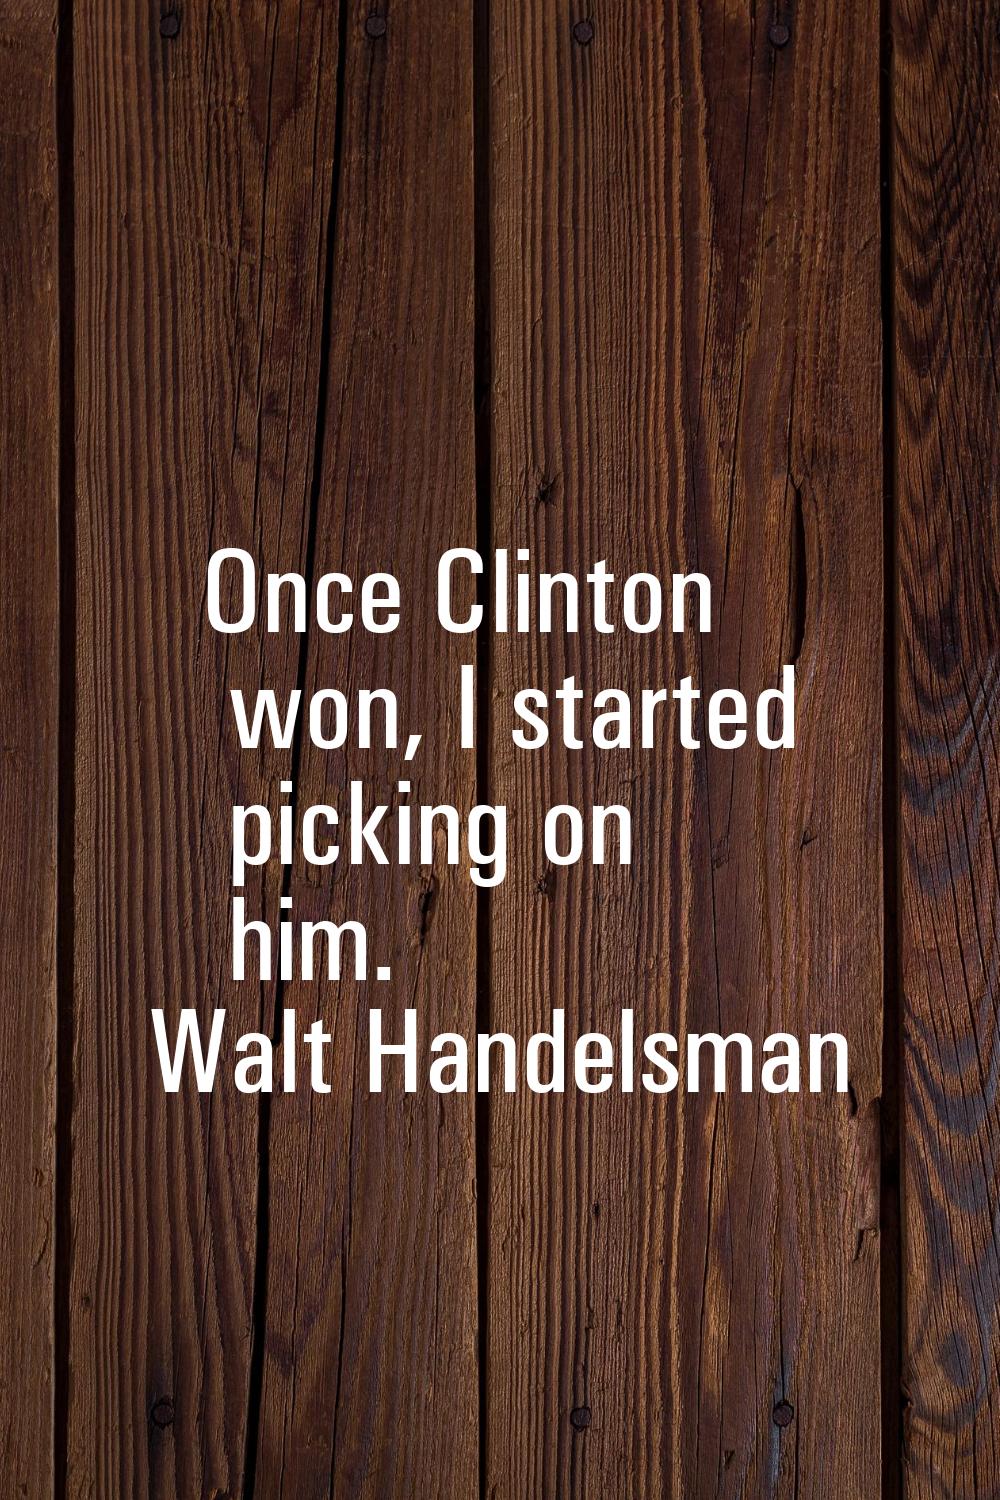 Once Clinton won, I started picking on him.